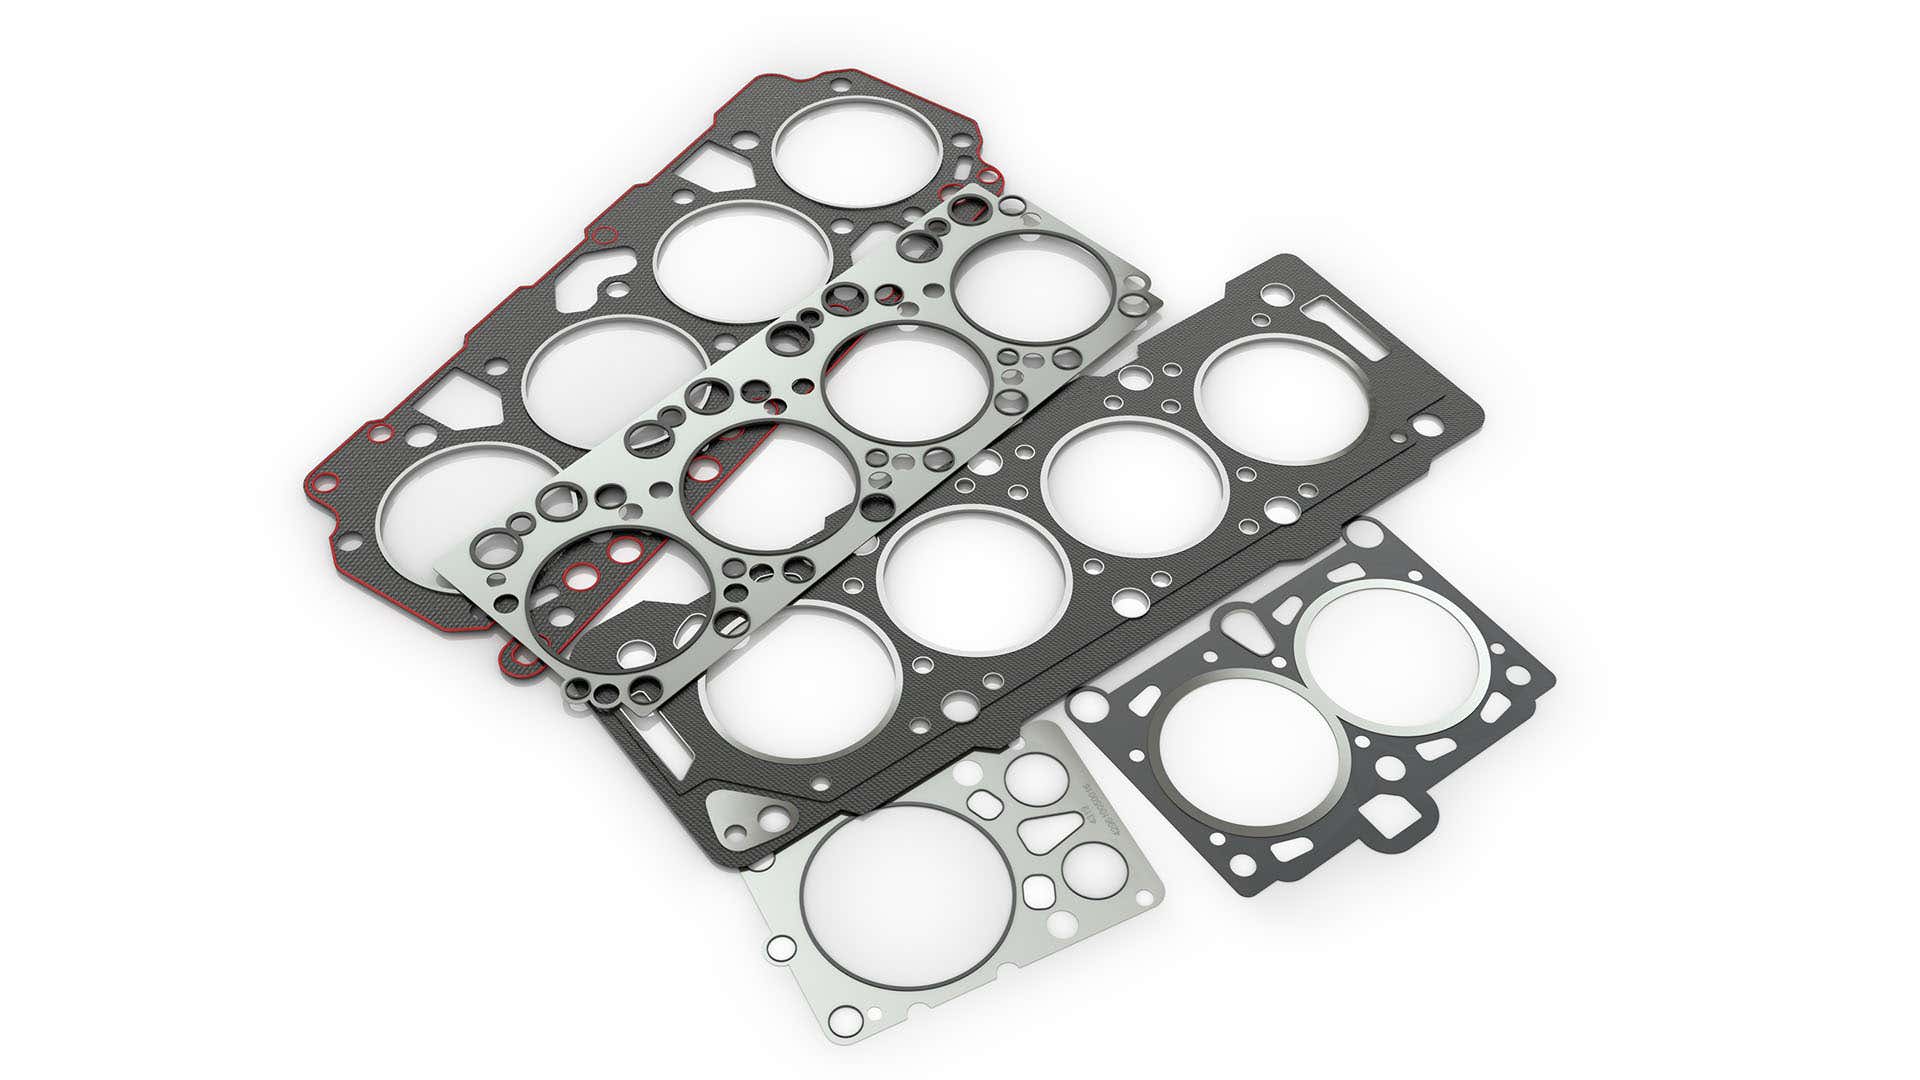 Various gaskets on a white background.